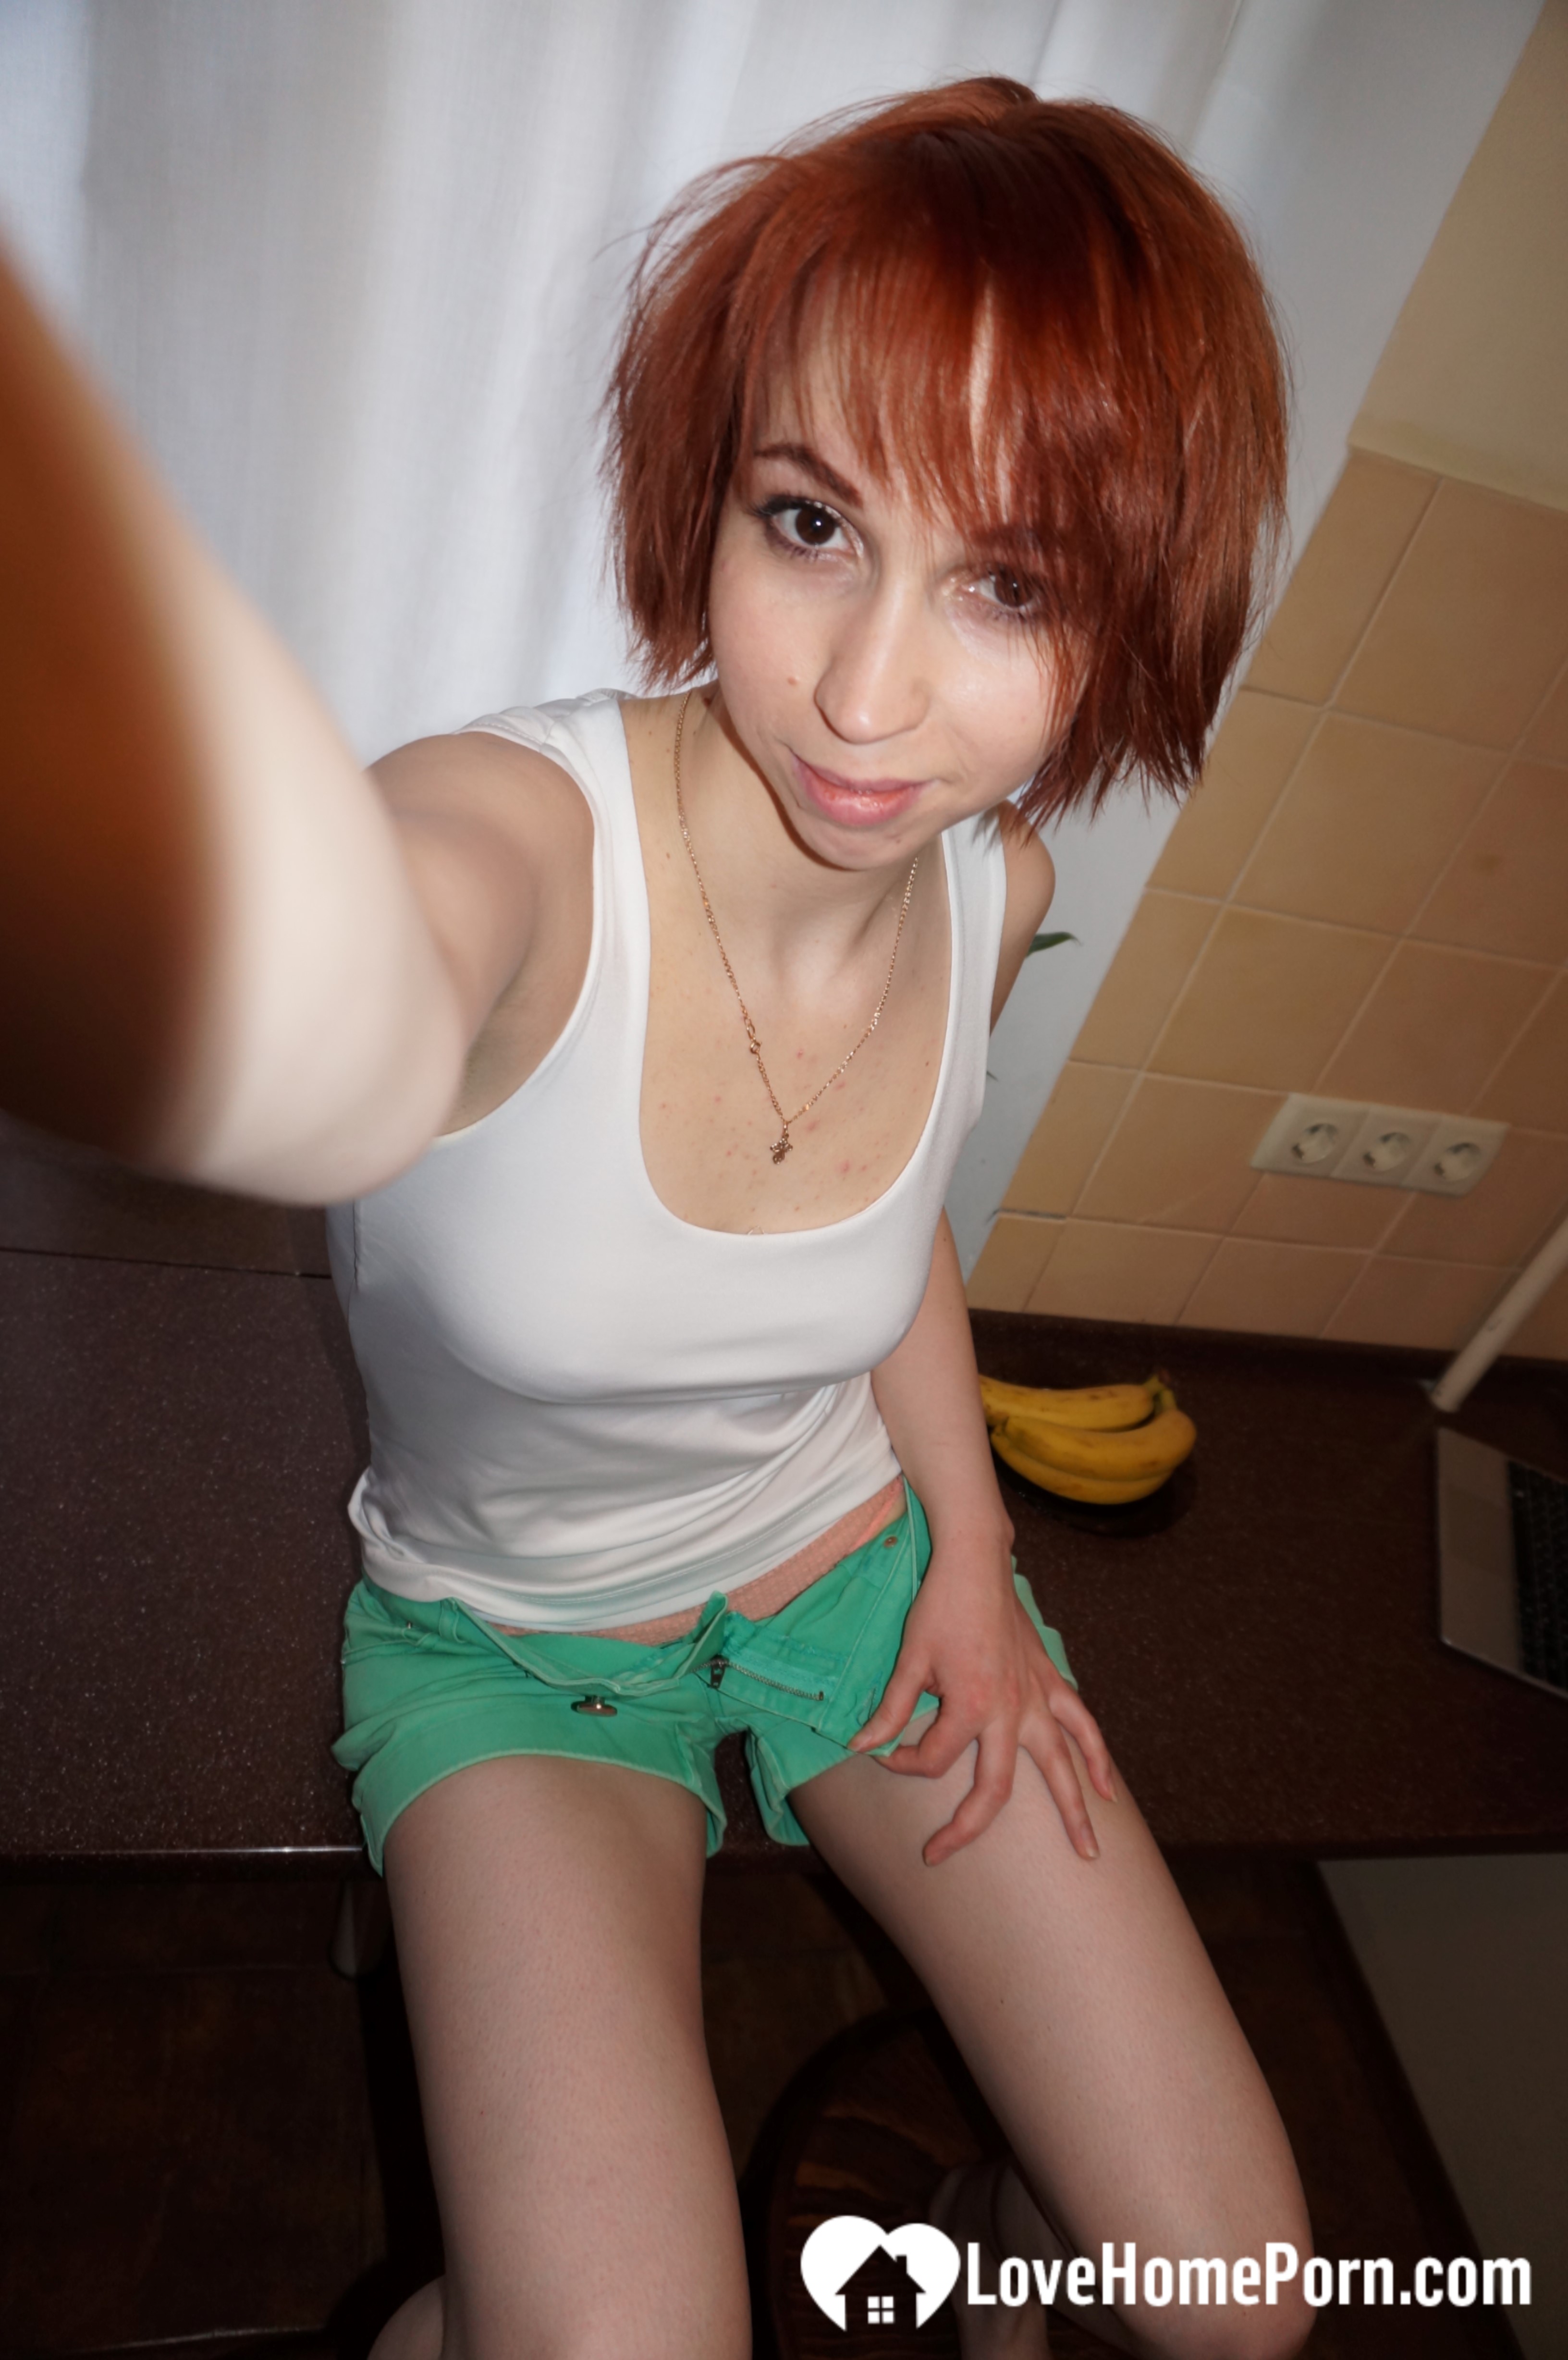 Beautiful redhead knows how to highlight her goods